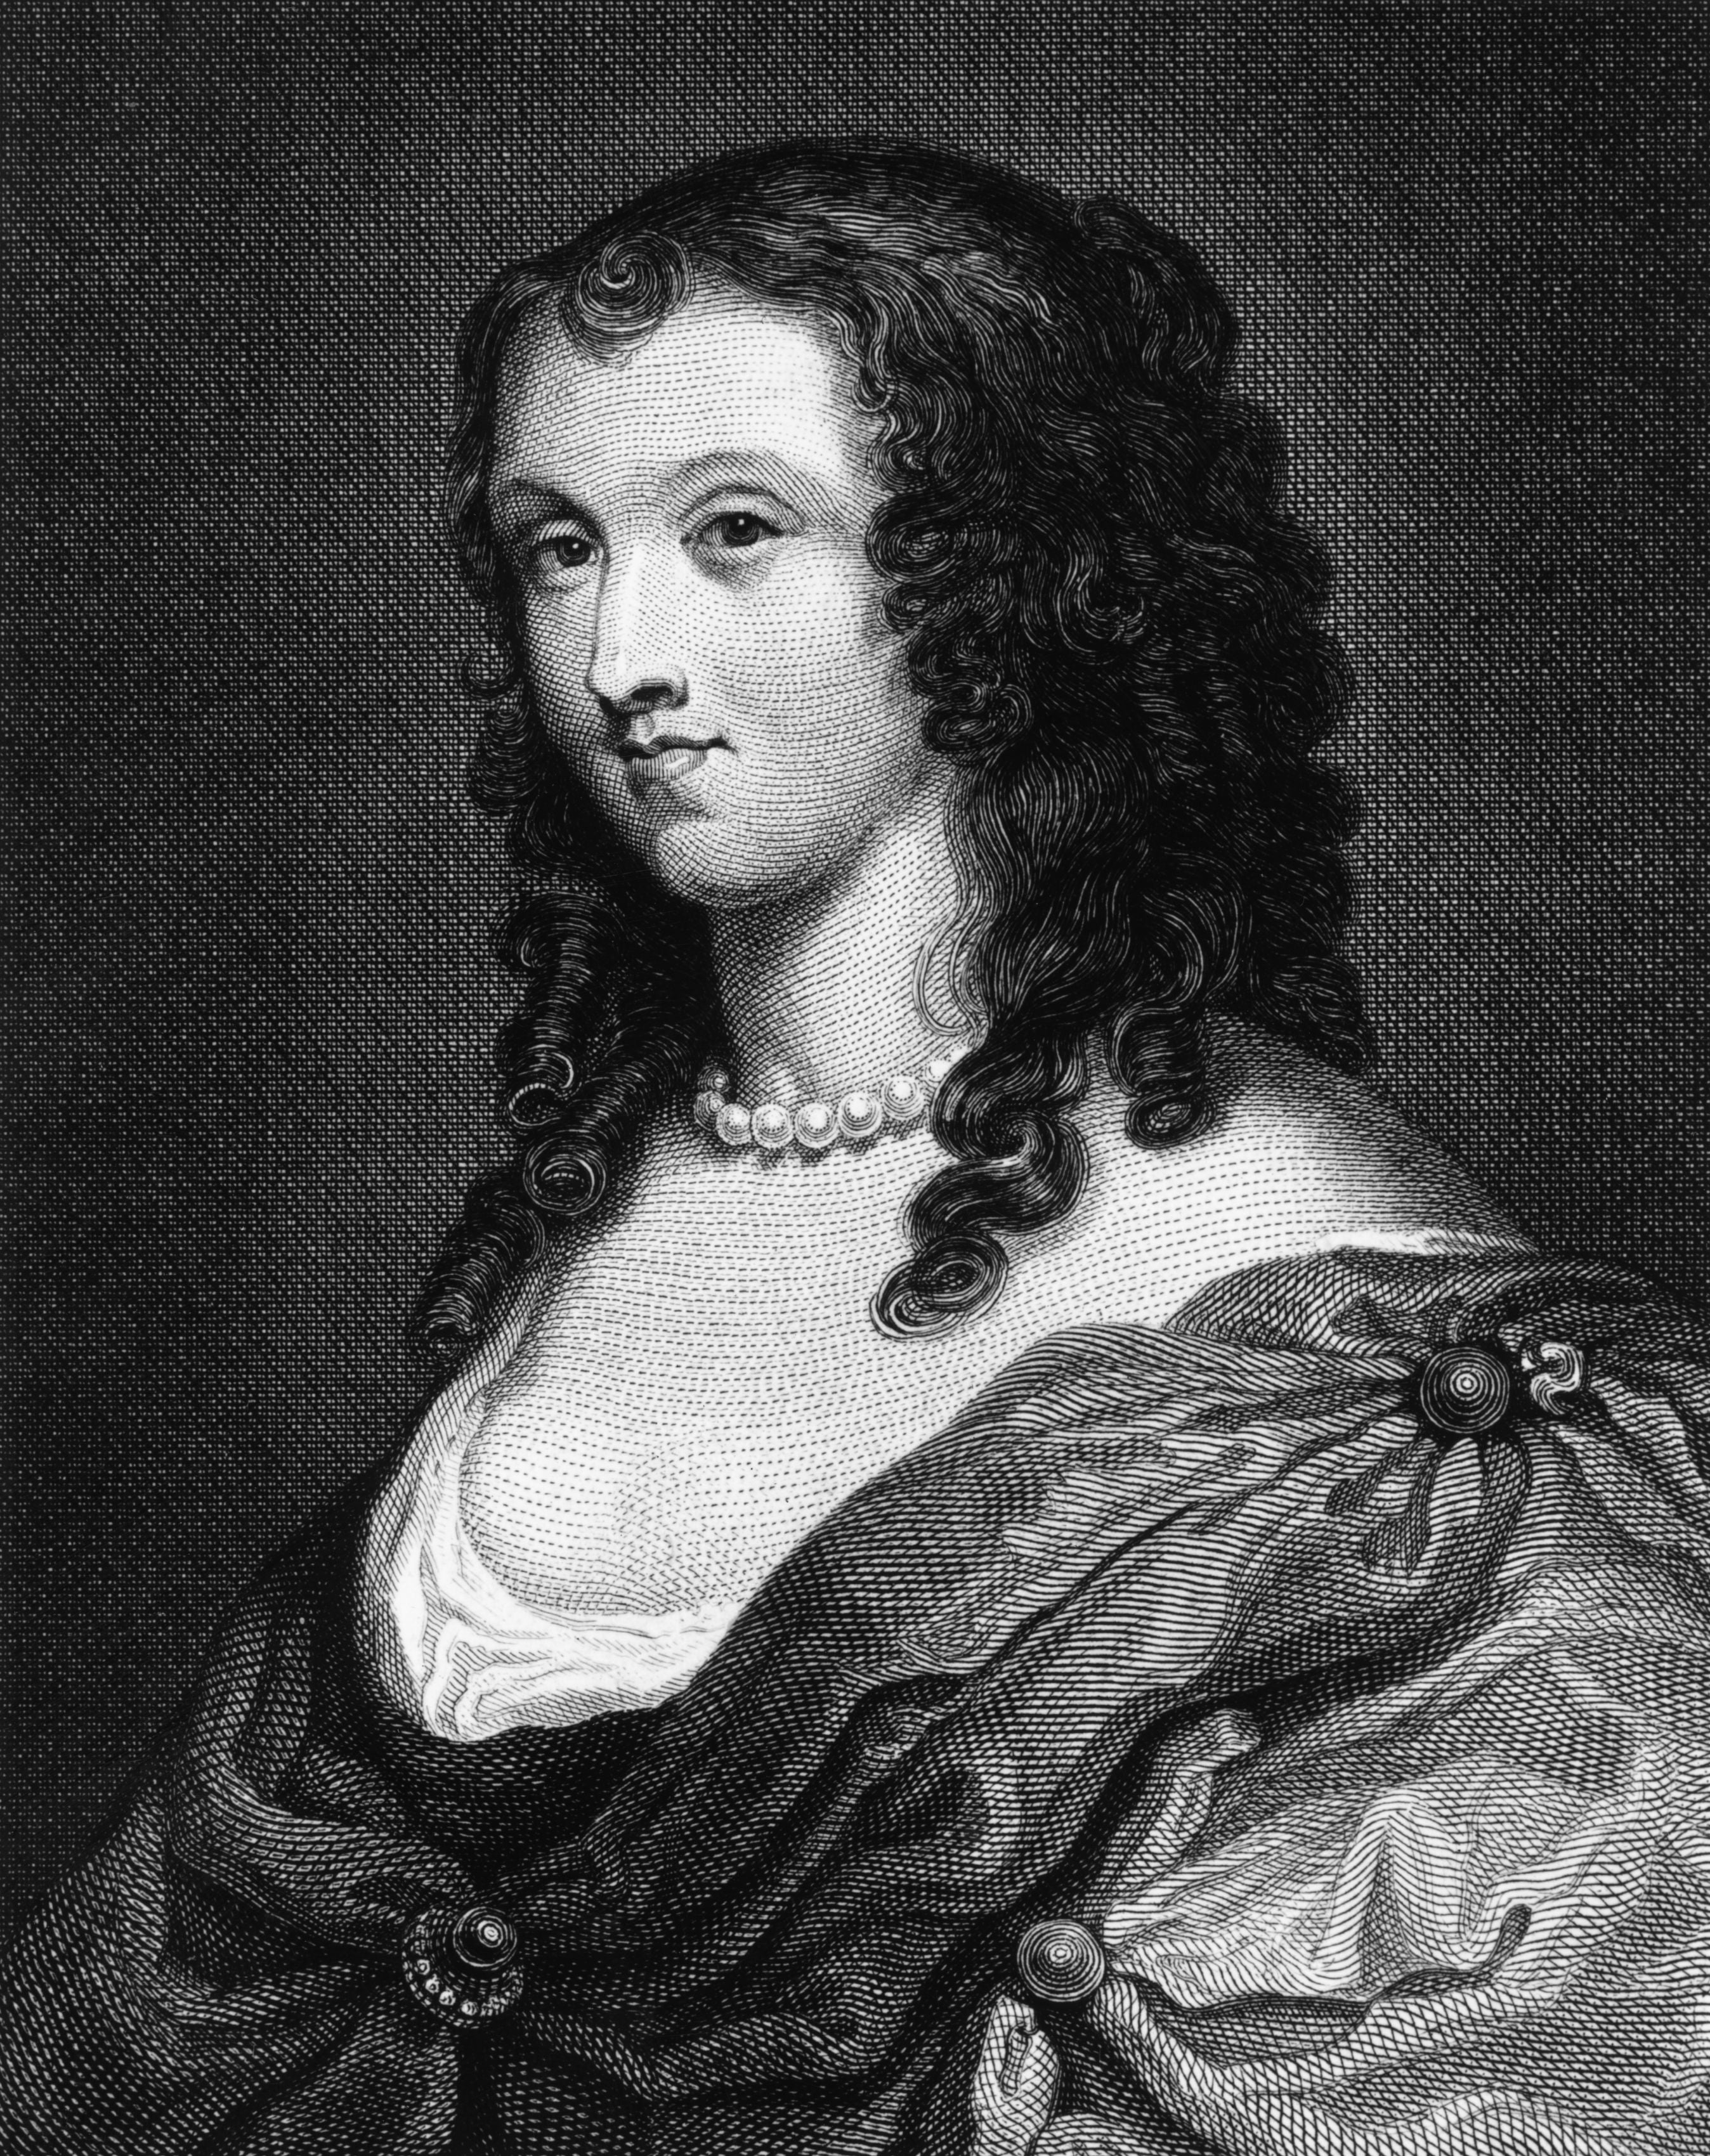 theatre, female playwrights, aphra behn play once considered too ‘shocking’ for audiences performed for first time since 1671